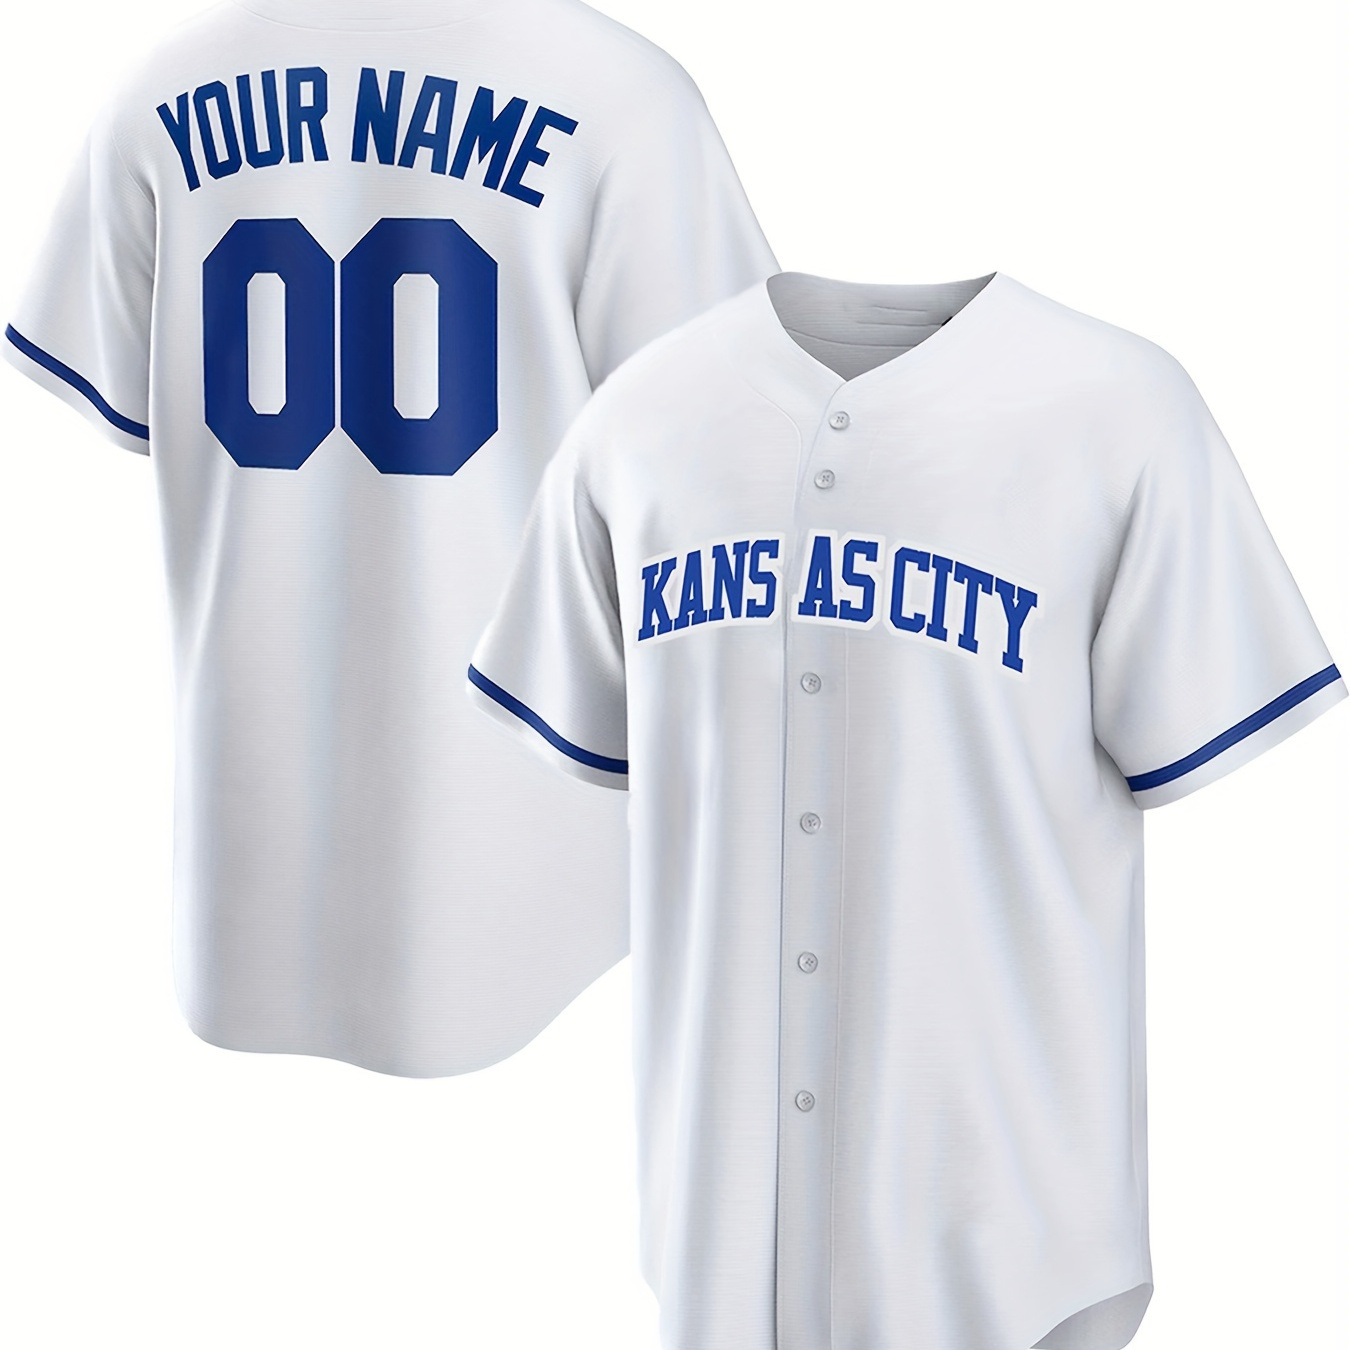 

Customized Kansas City Men's Baseball Jersey, Personalized Name And Number, Embroidered Leisure Outdoor Sports Shirt